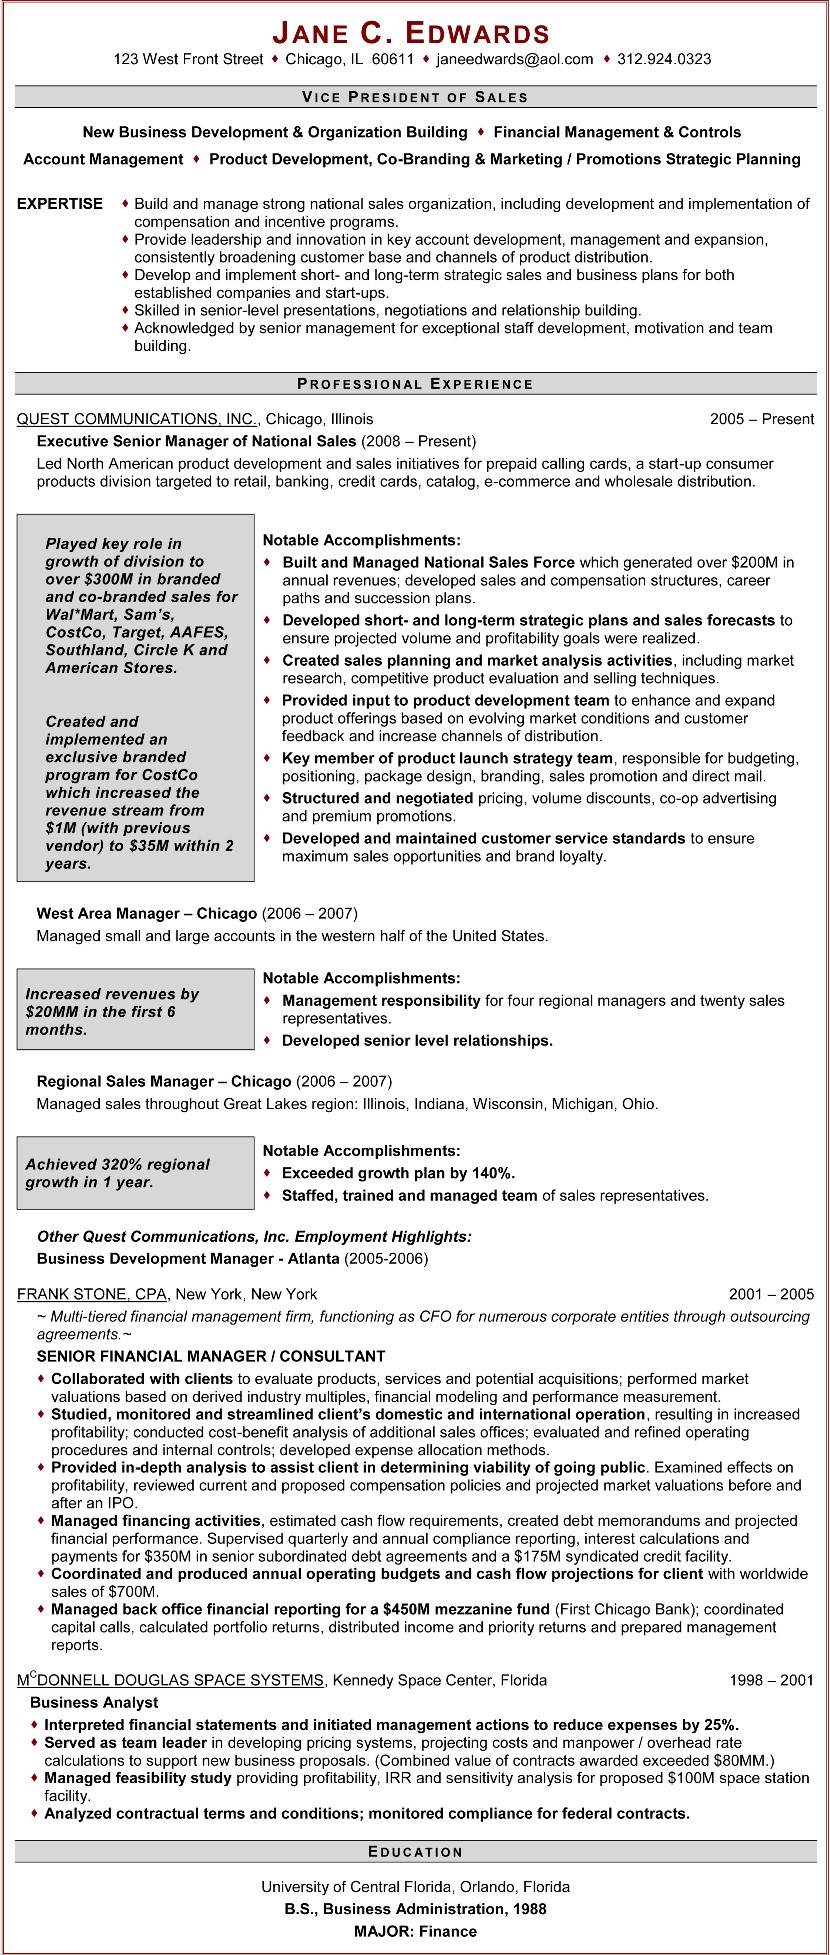 Sample Of Resume Objectives for Vp Of Operations Sample RÃ©sumÃ©: Vp Sales Certified Resume Writer